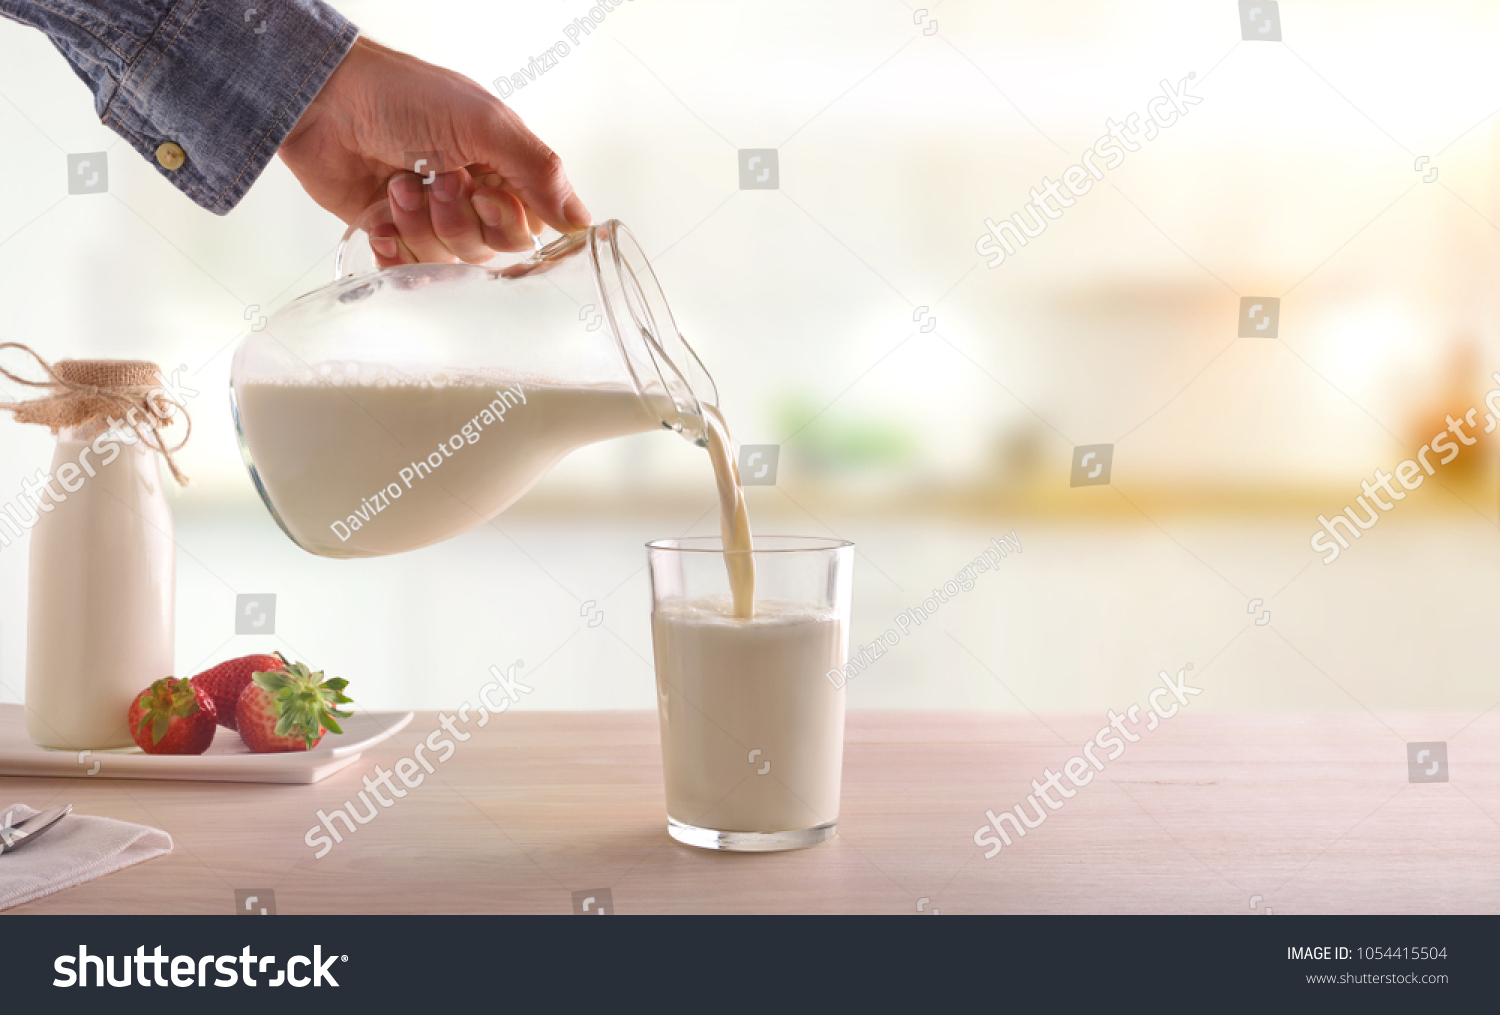 Serving breakfast milk with a jug in a glass on a white wooden kitchen table. Horizontal composition. Front view #1054415504